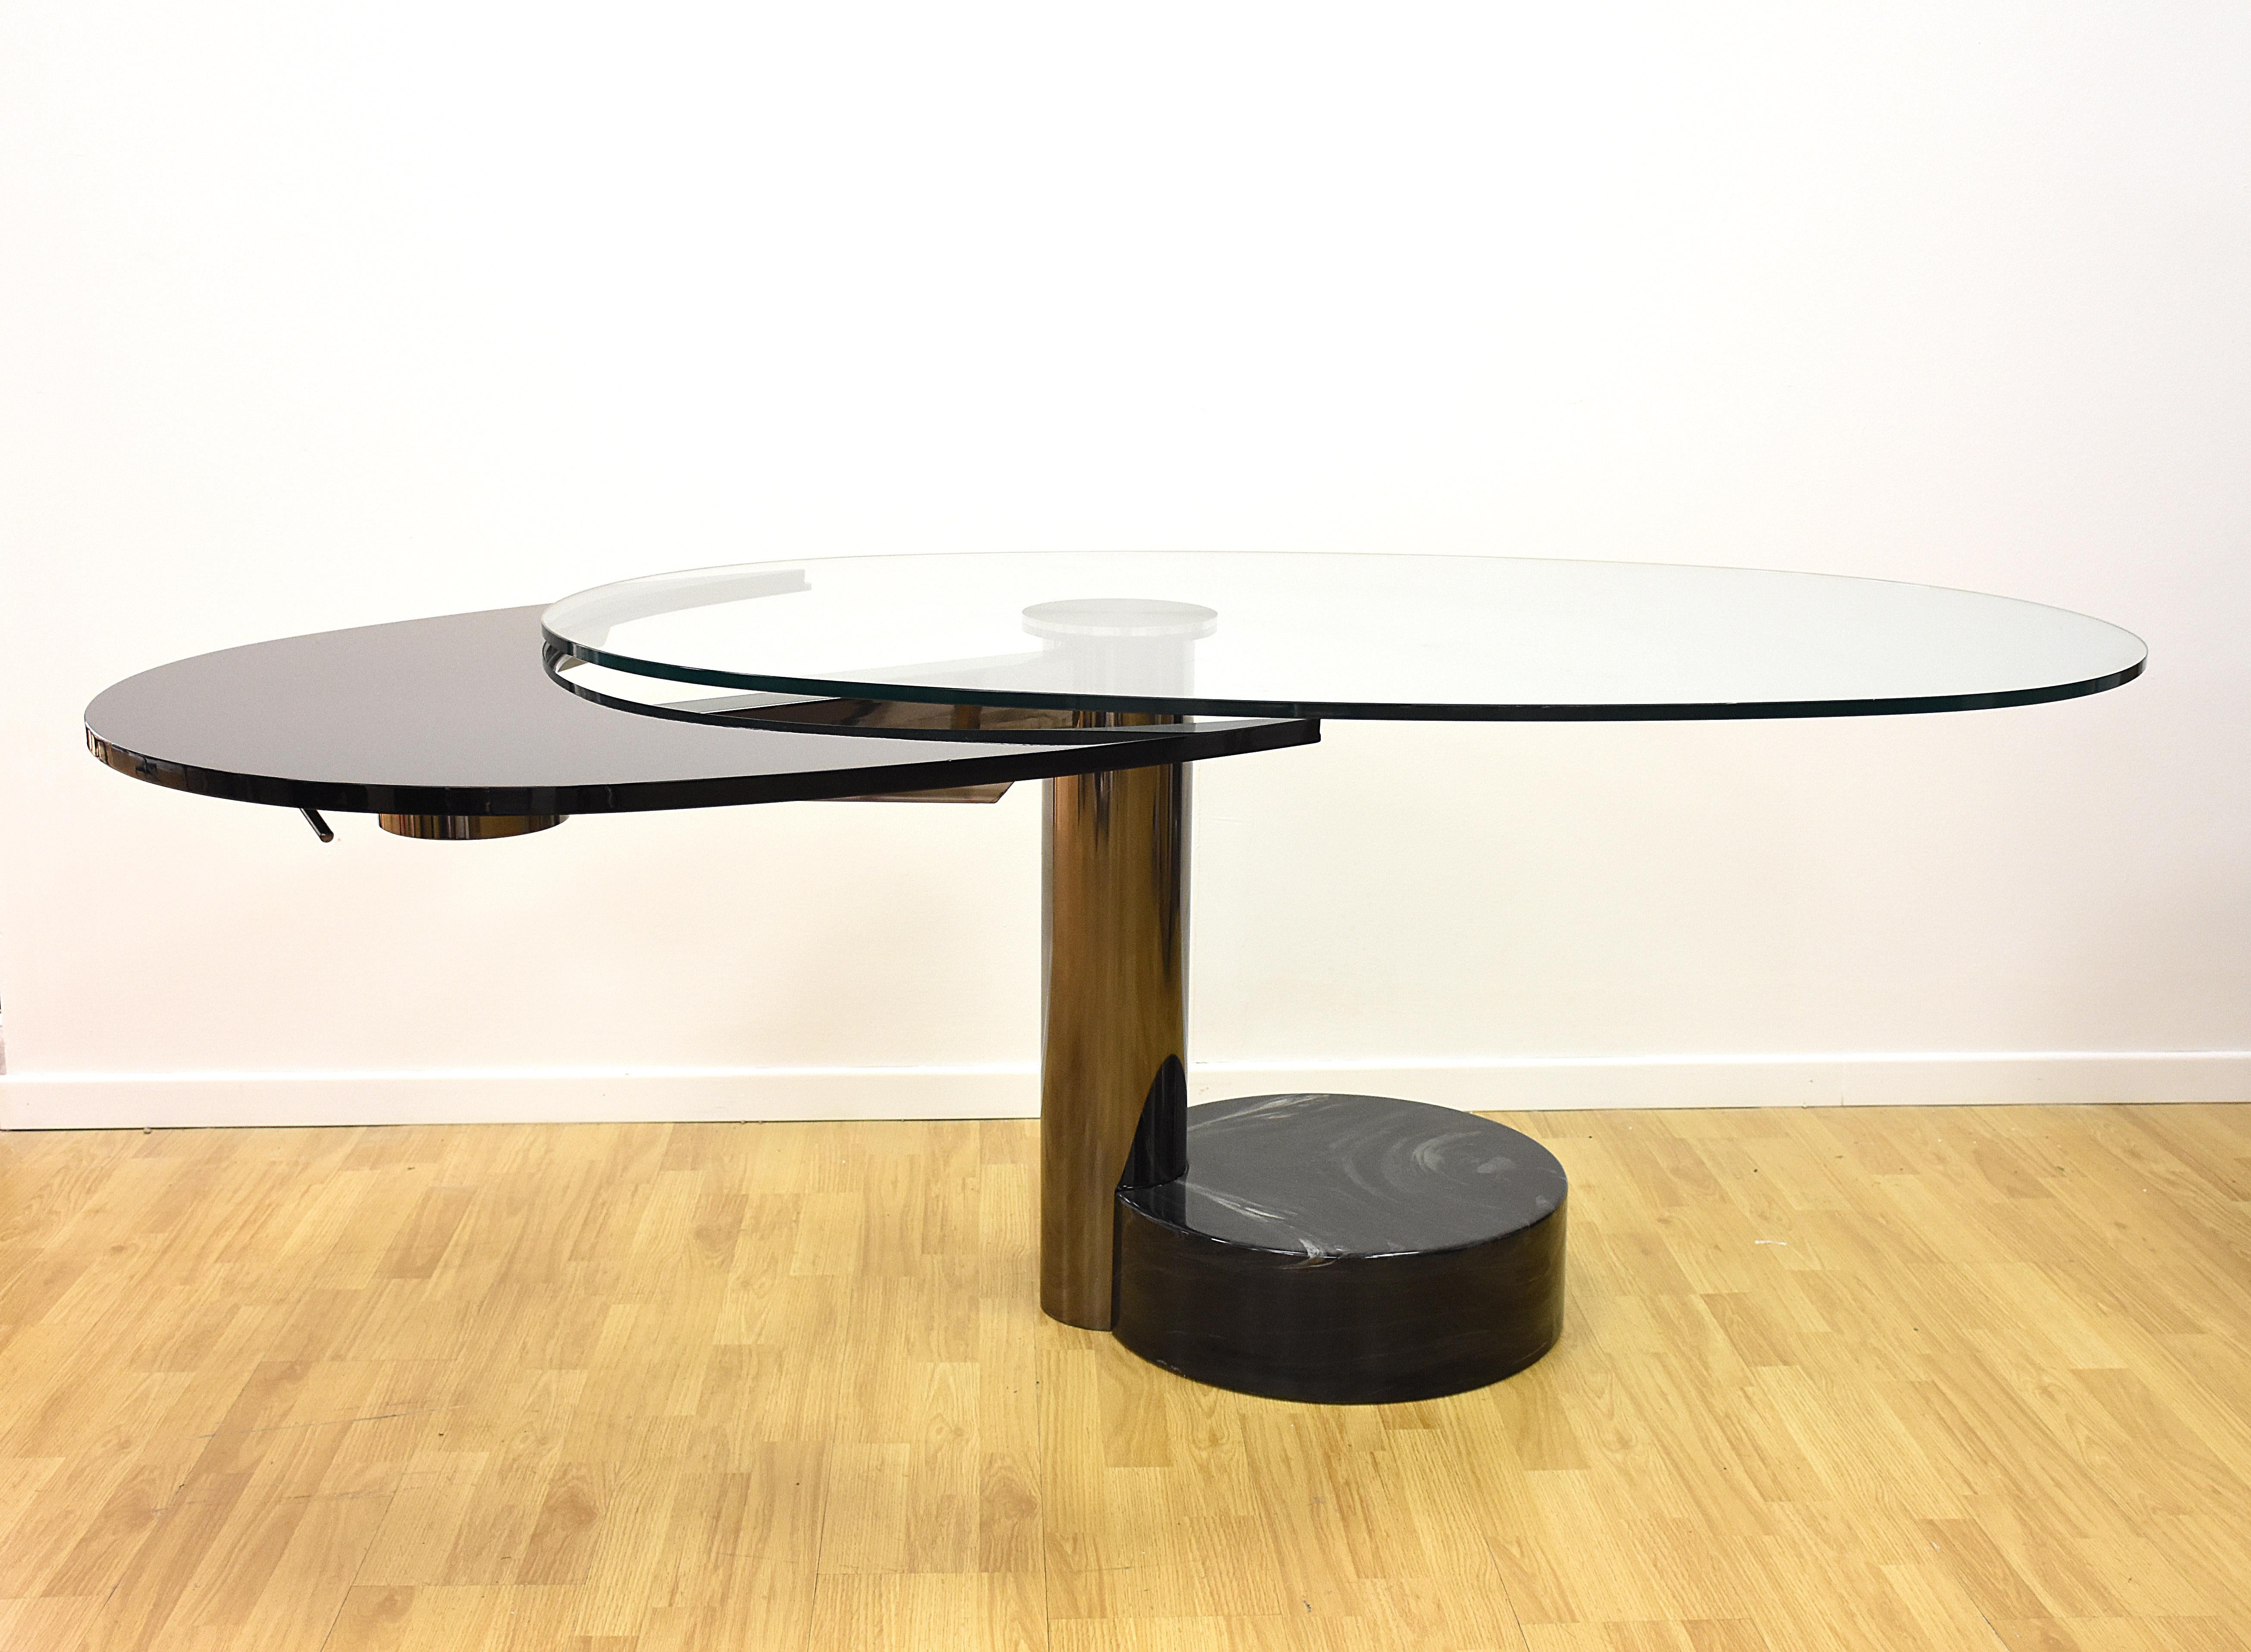 Mid-20th Century Midcentury Steel and Glass Oval Revolving Dining Table after Pierre Cardin 1960s